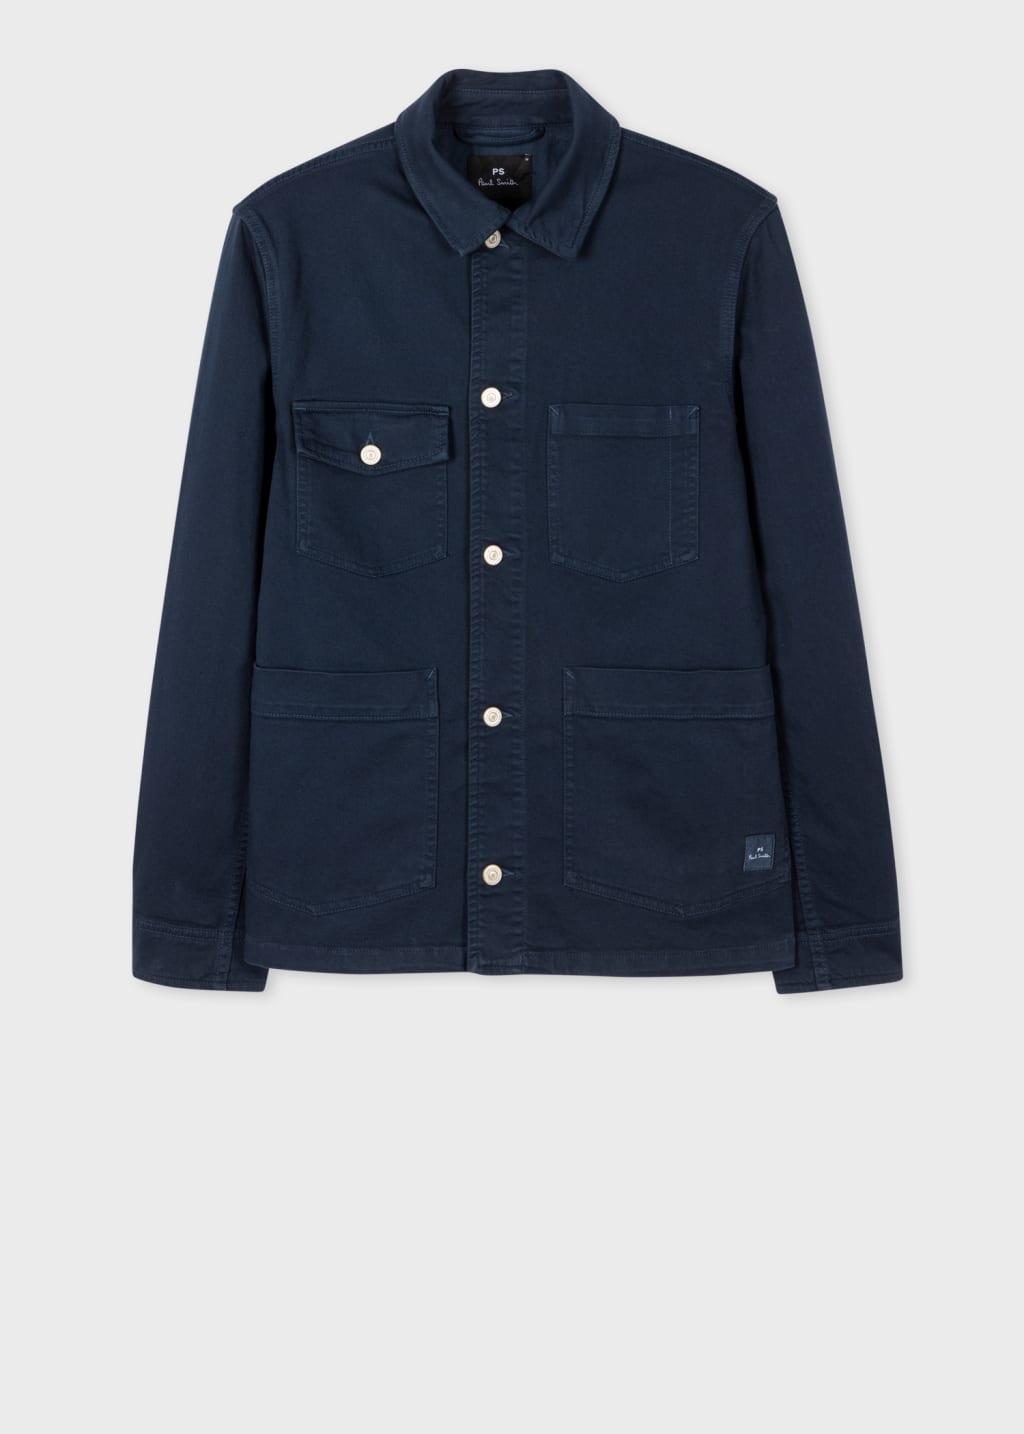 Product view - Navy Stretch-Cotton Chore Jacket